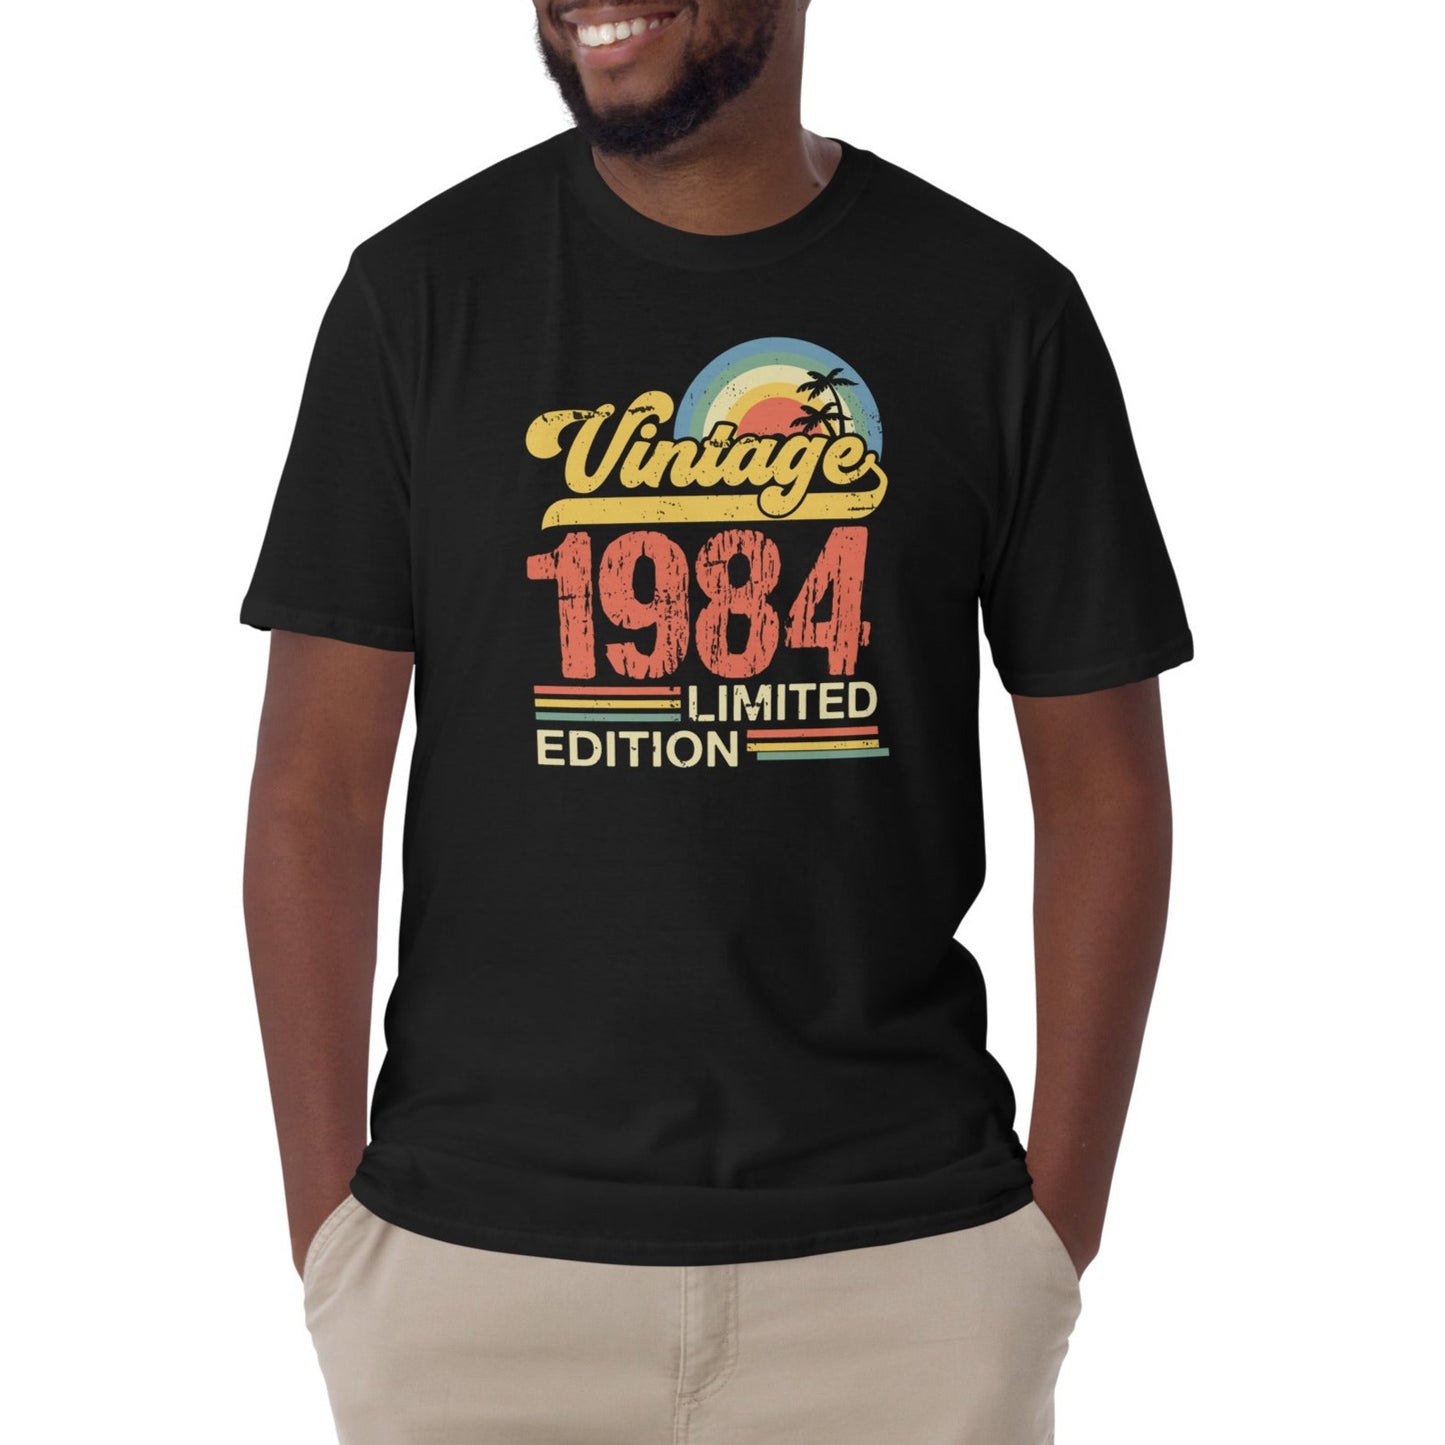 Unisex t-shirt: Vintage - with selected year